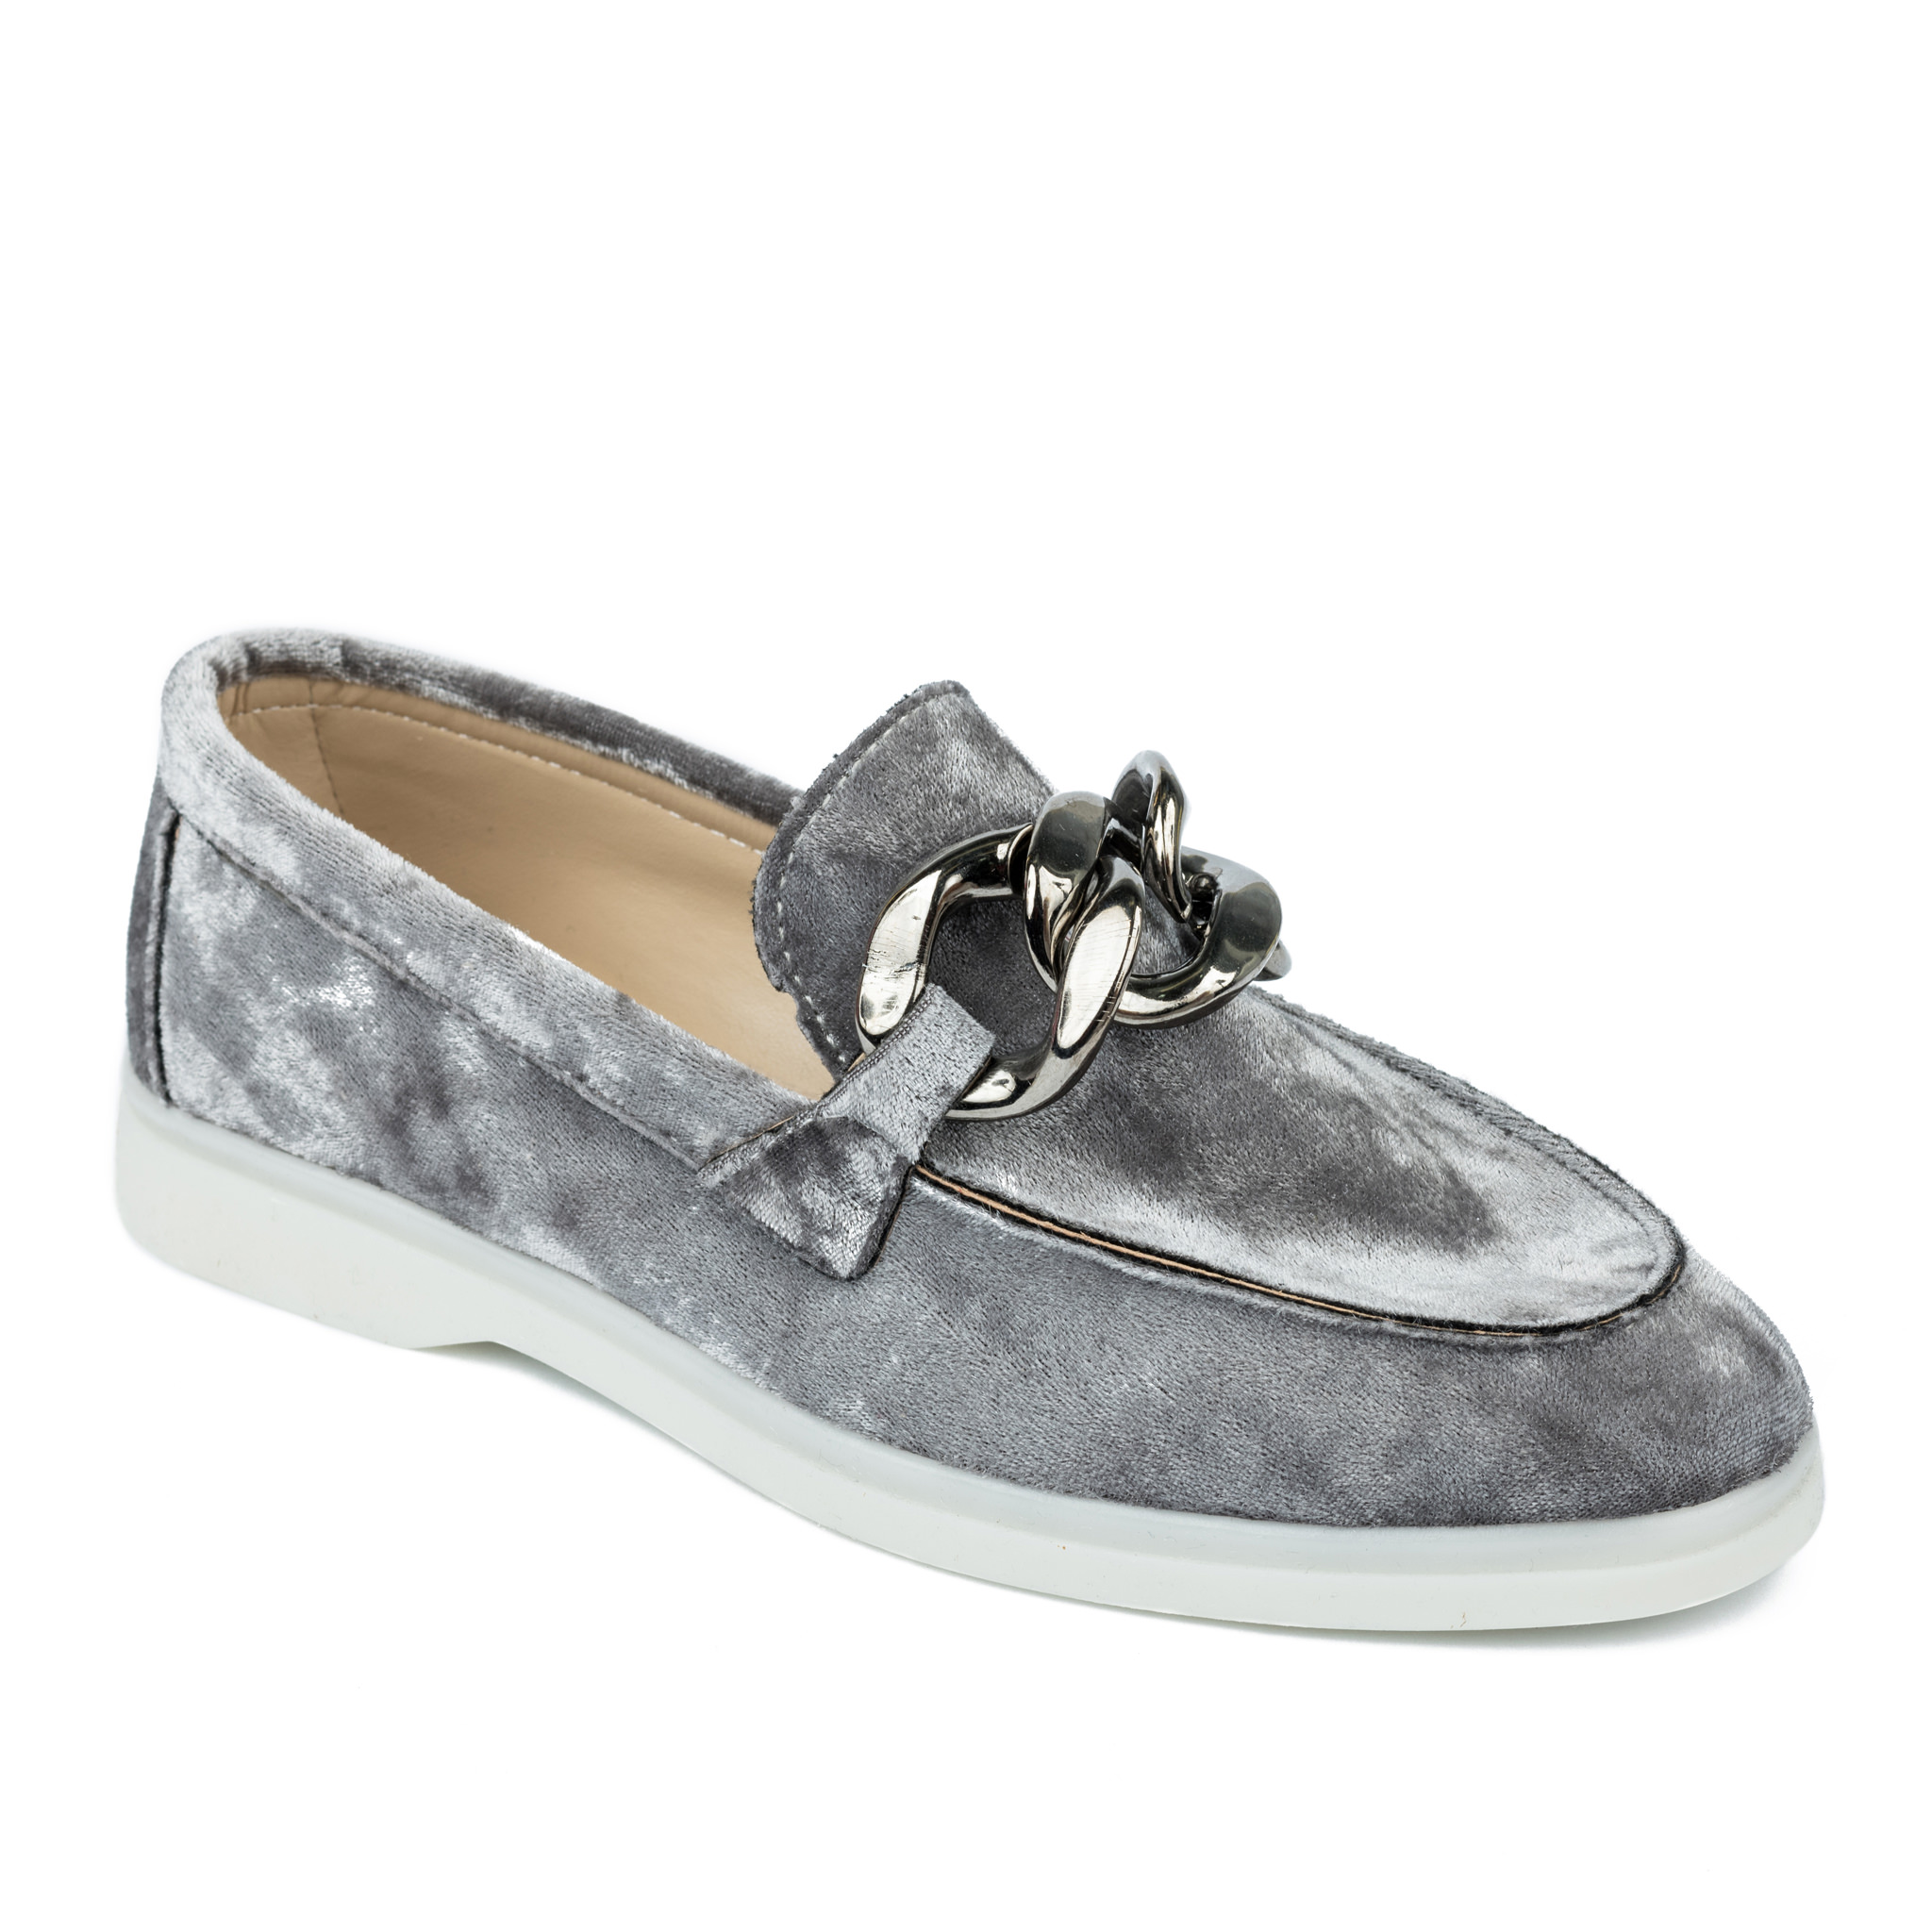 PLUSH MOCCASINS WITH CHAIN - GRAY